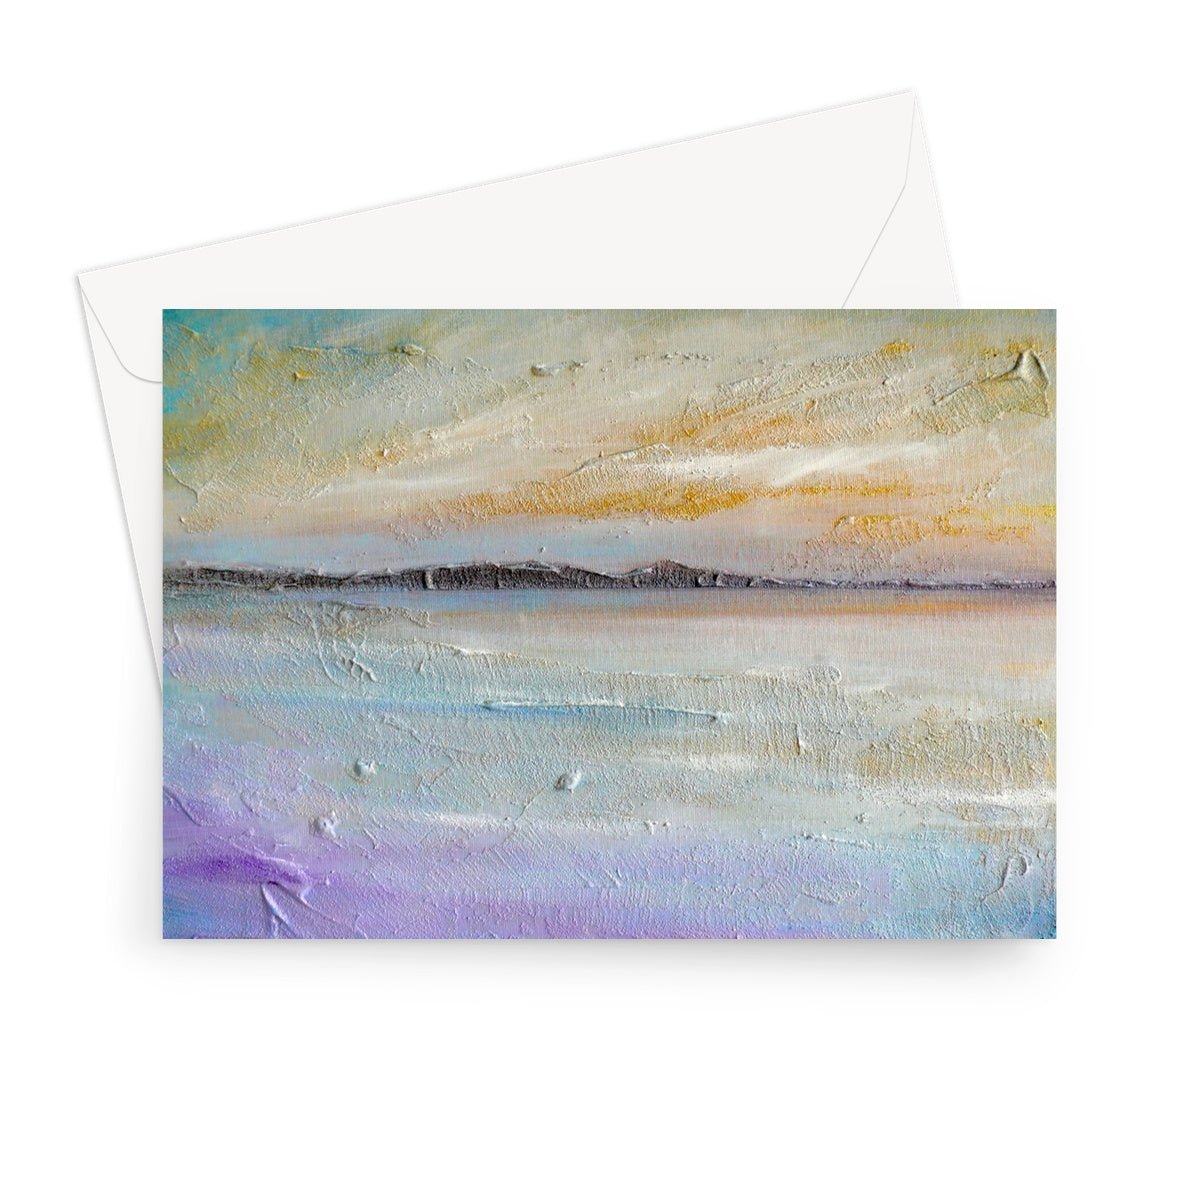 Sollas Beach South Uist Art Gifts Greeting Card-Greetings Cards-Hebridean Islands Art Gallery-7"x5"-10 Cards-Paintings, Prints, Homeware, Art Gifts From Scotland By Scottish Artist Kevin Hunter